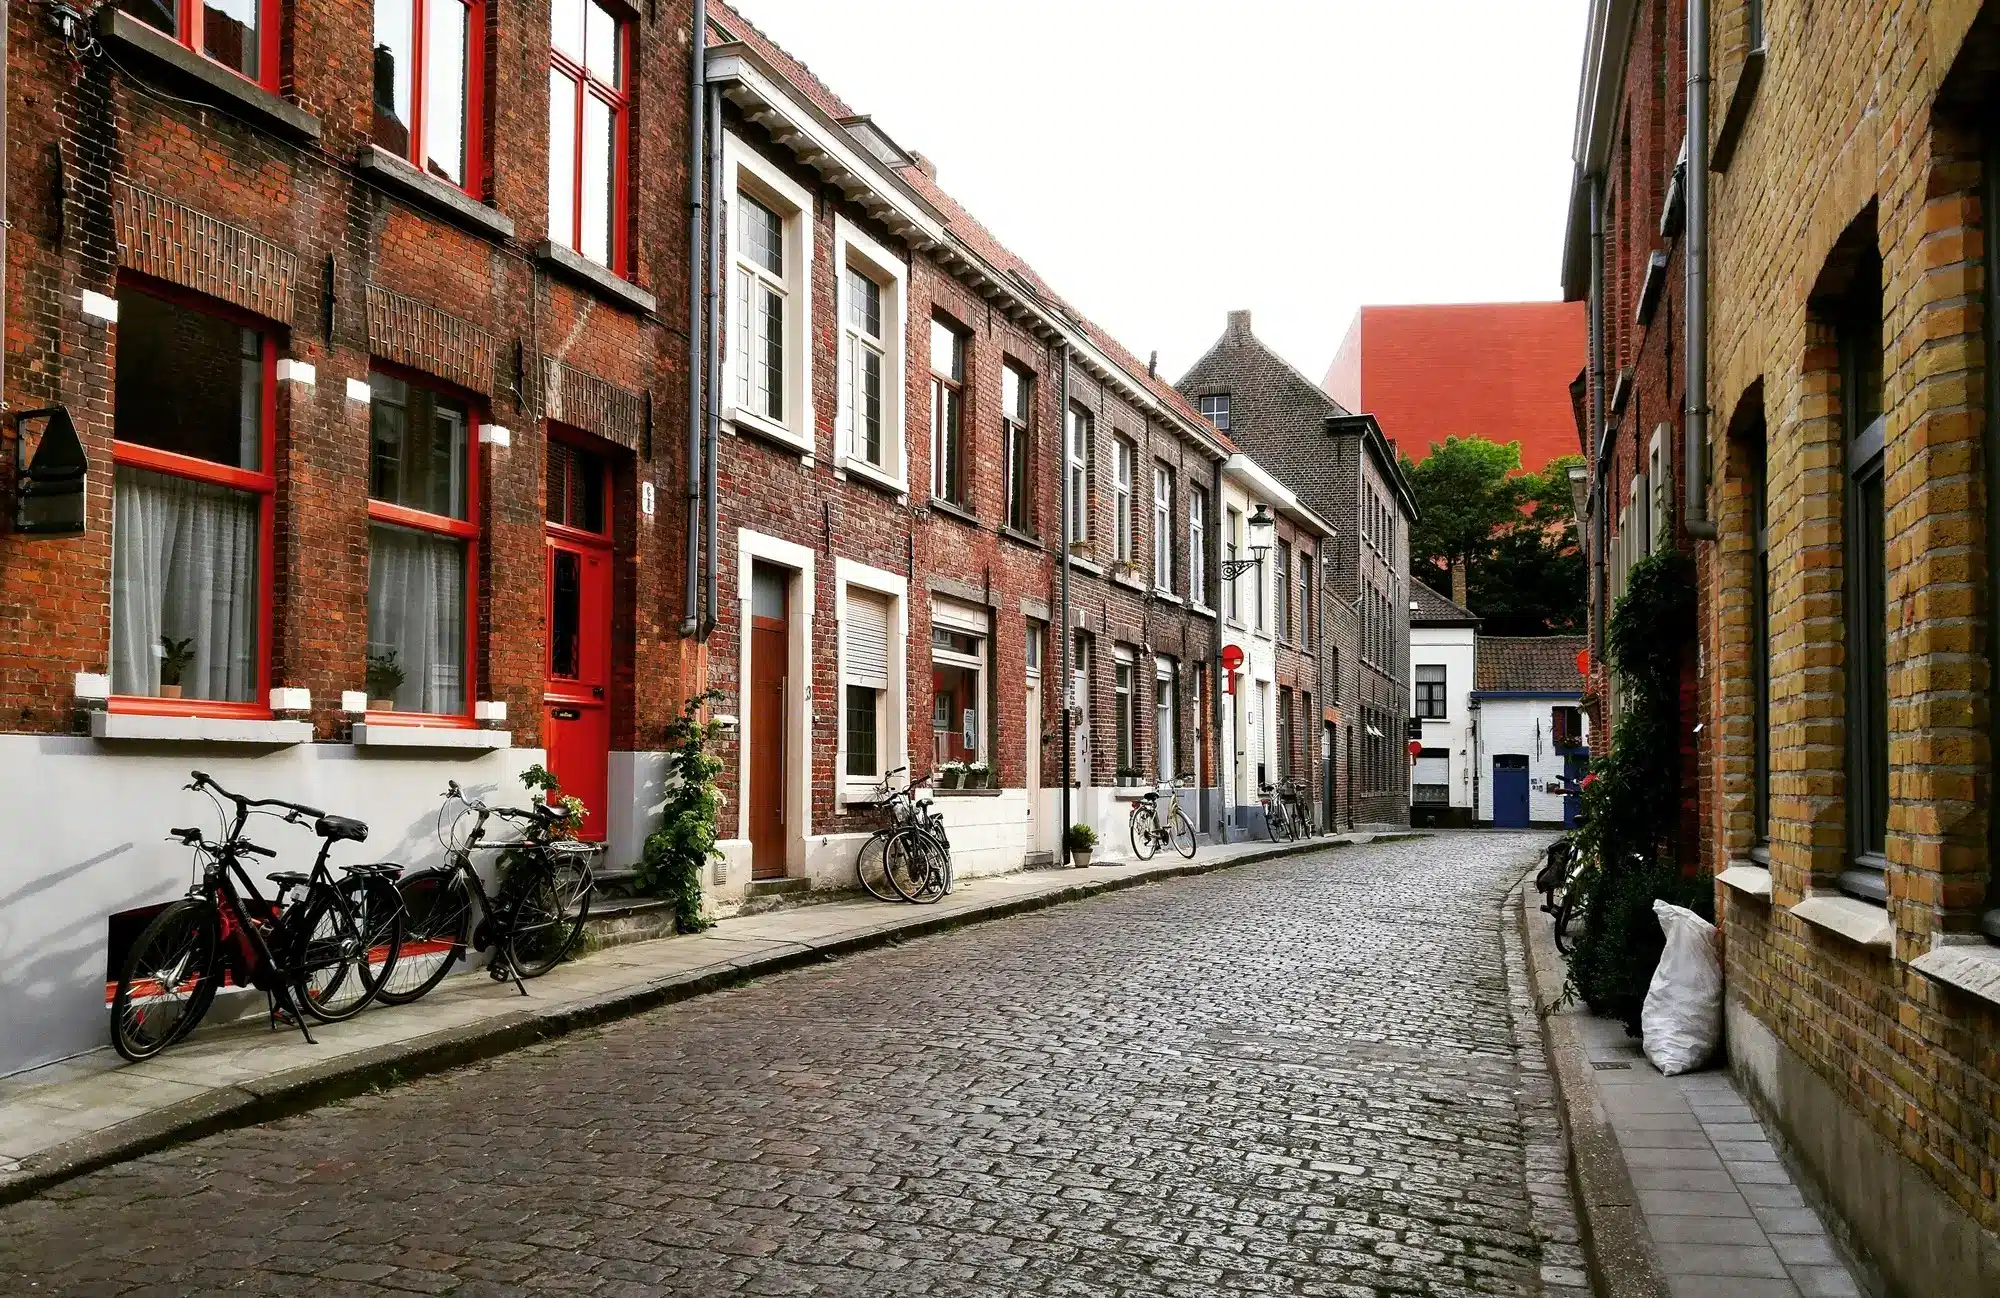 A cobblestone street with brick buildings, representing the concept of testamentary trust.